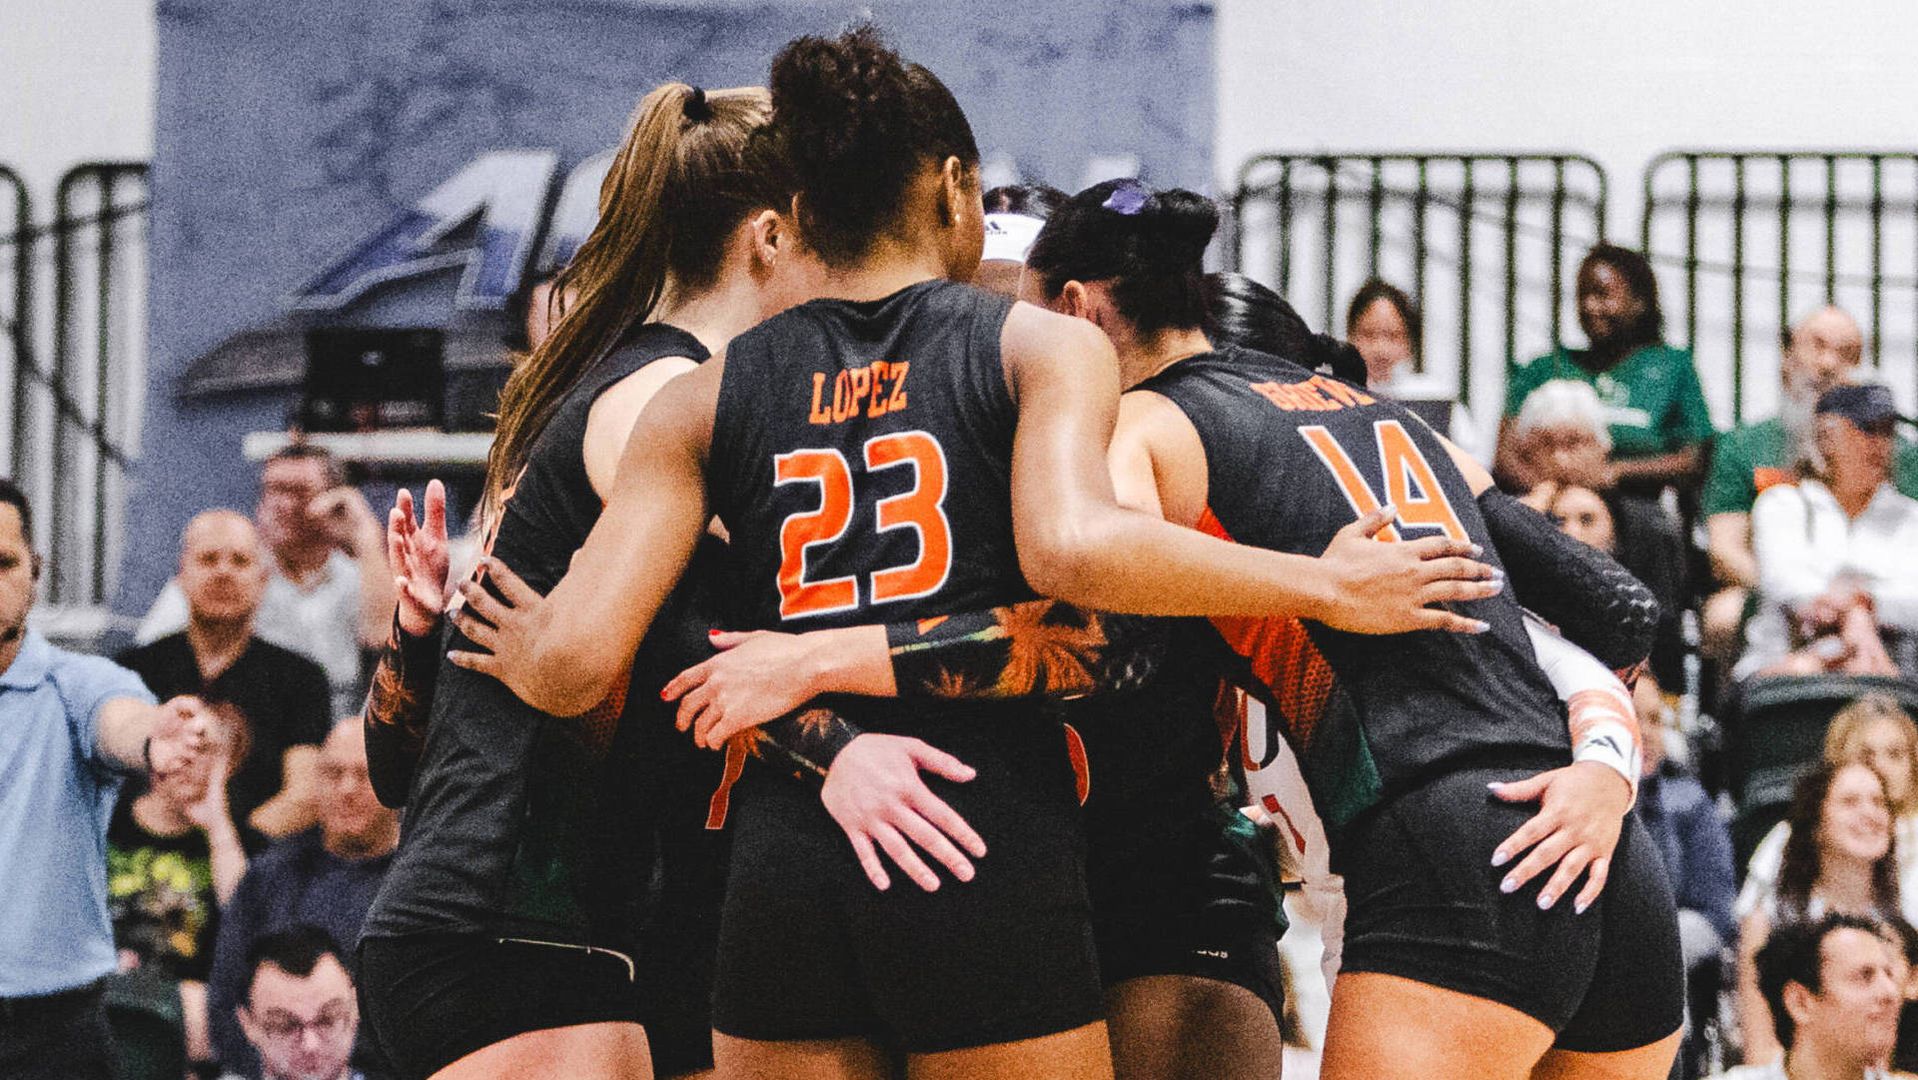 Miami Falls In Four Sets To No. 6 Pitt